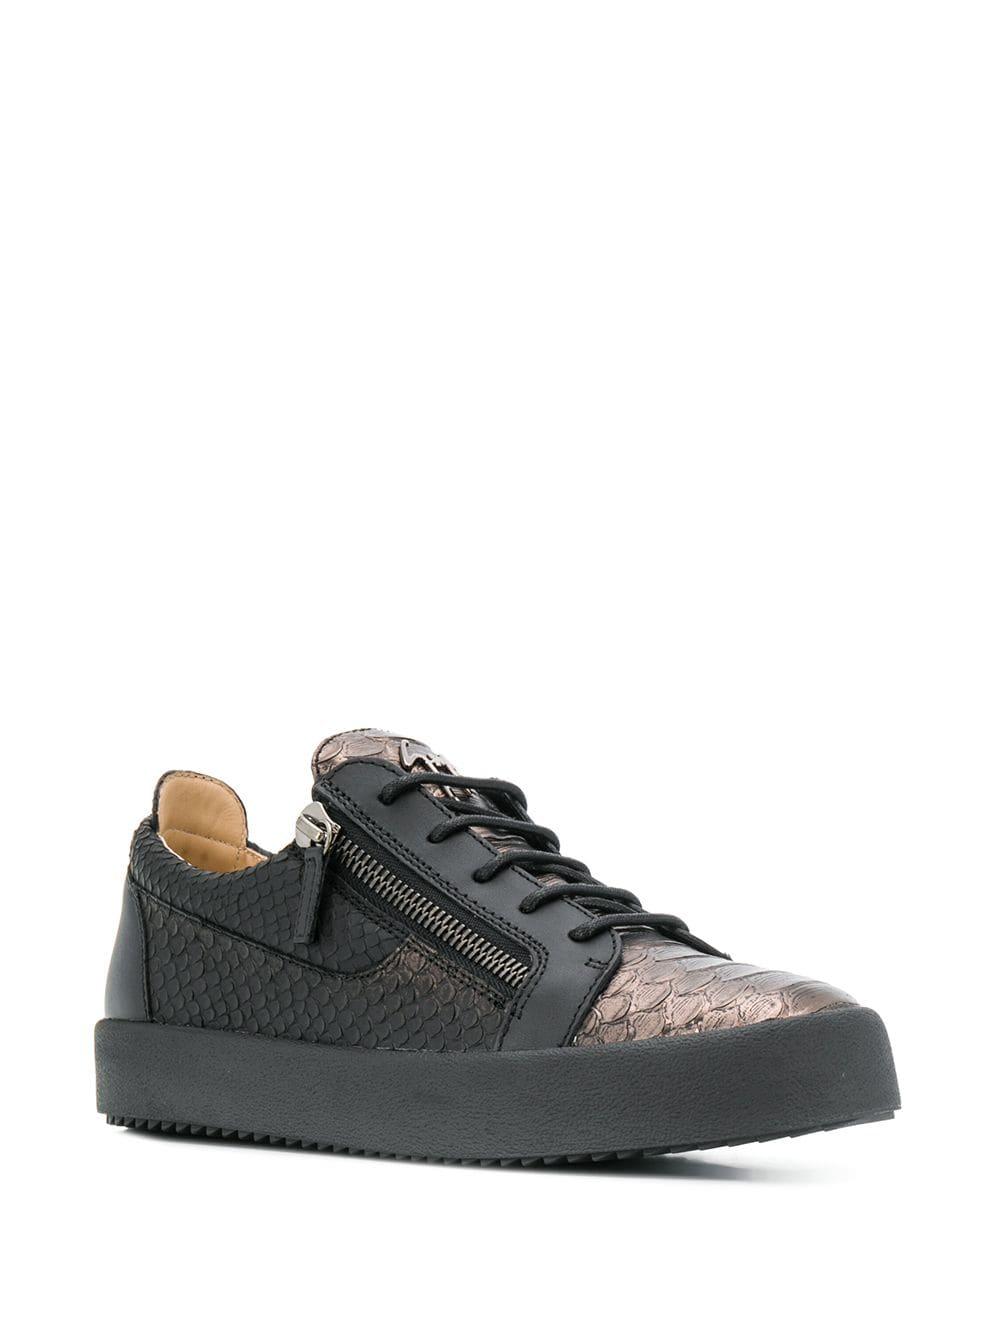 Giuseppe Zanotti Leather Snake Skin Effect Trainers in Black for -